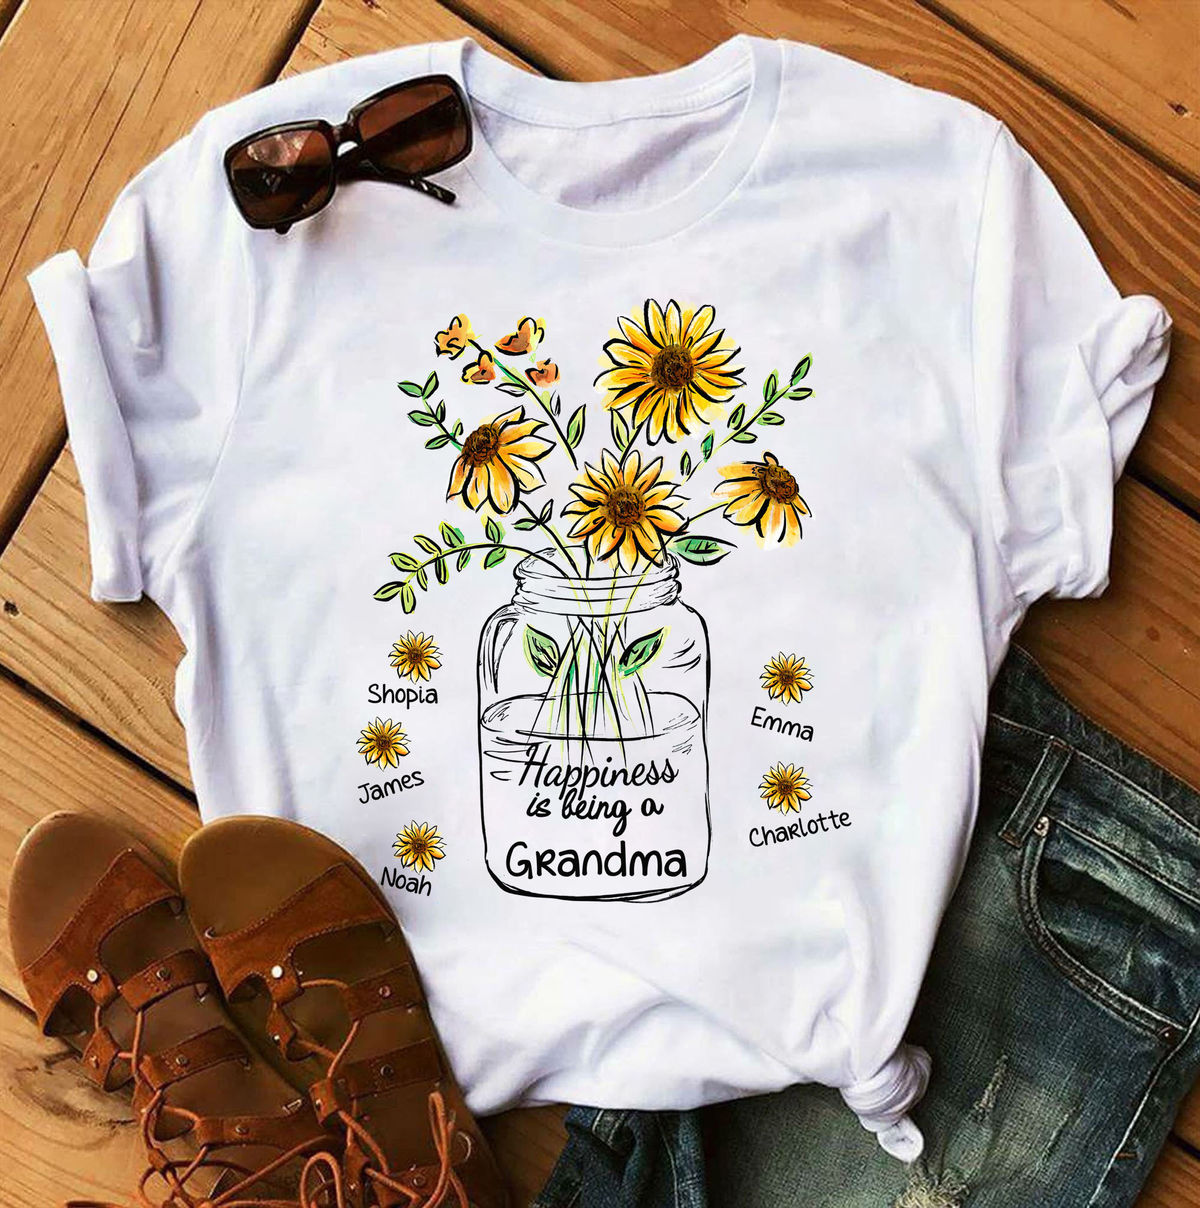 Personalized Shirt - Family - Love Flower - A Gift That Makes Them Smile - Up to 29 kids_1